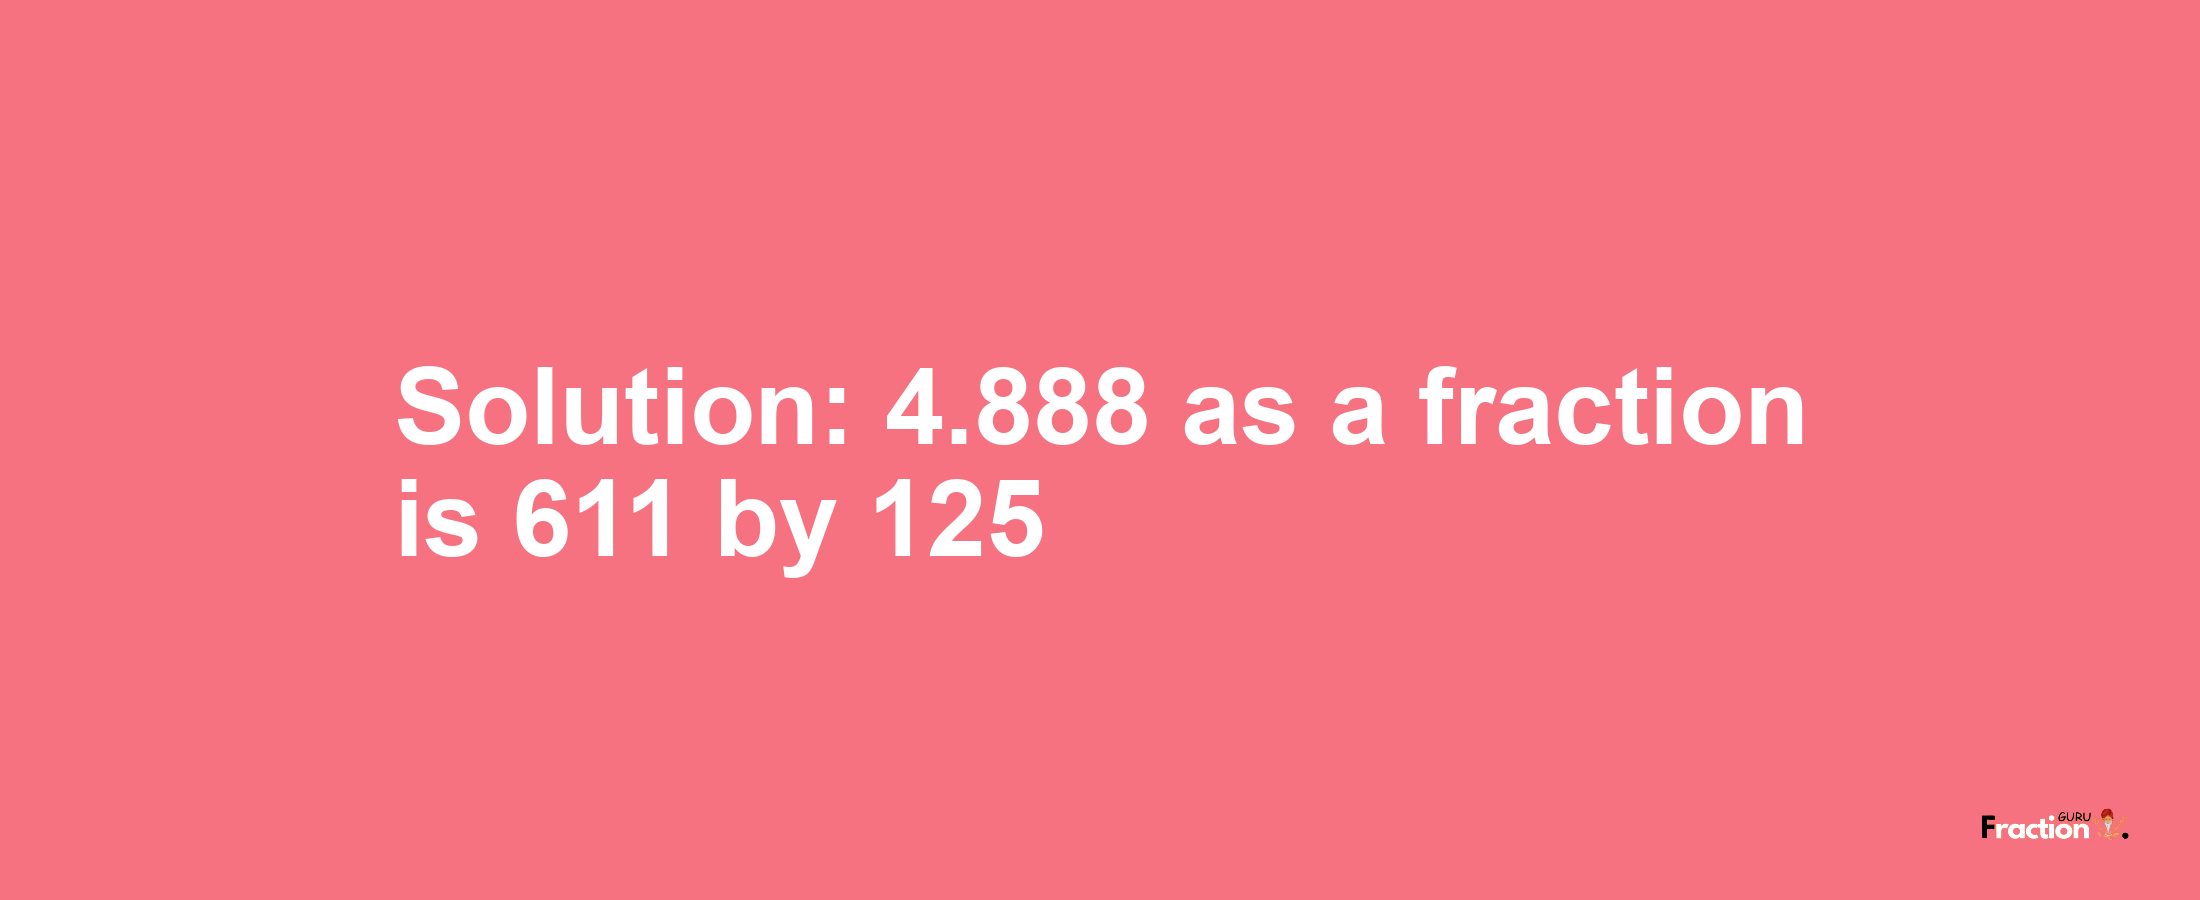 Solution:4.888 as a fraction is 611/125